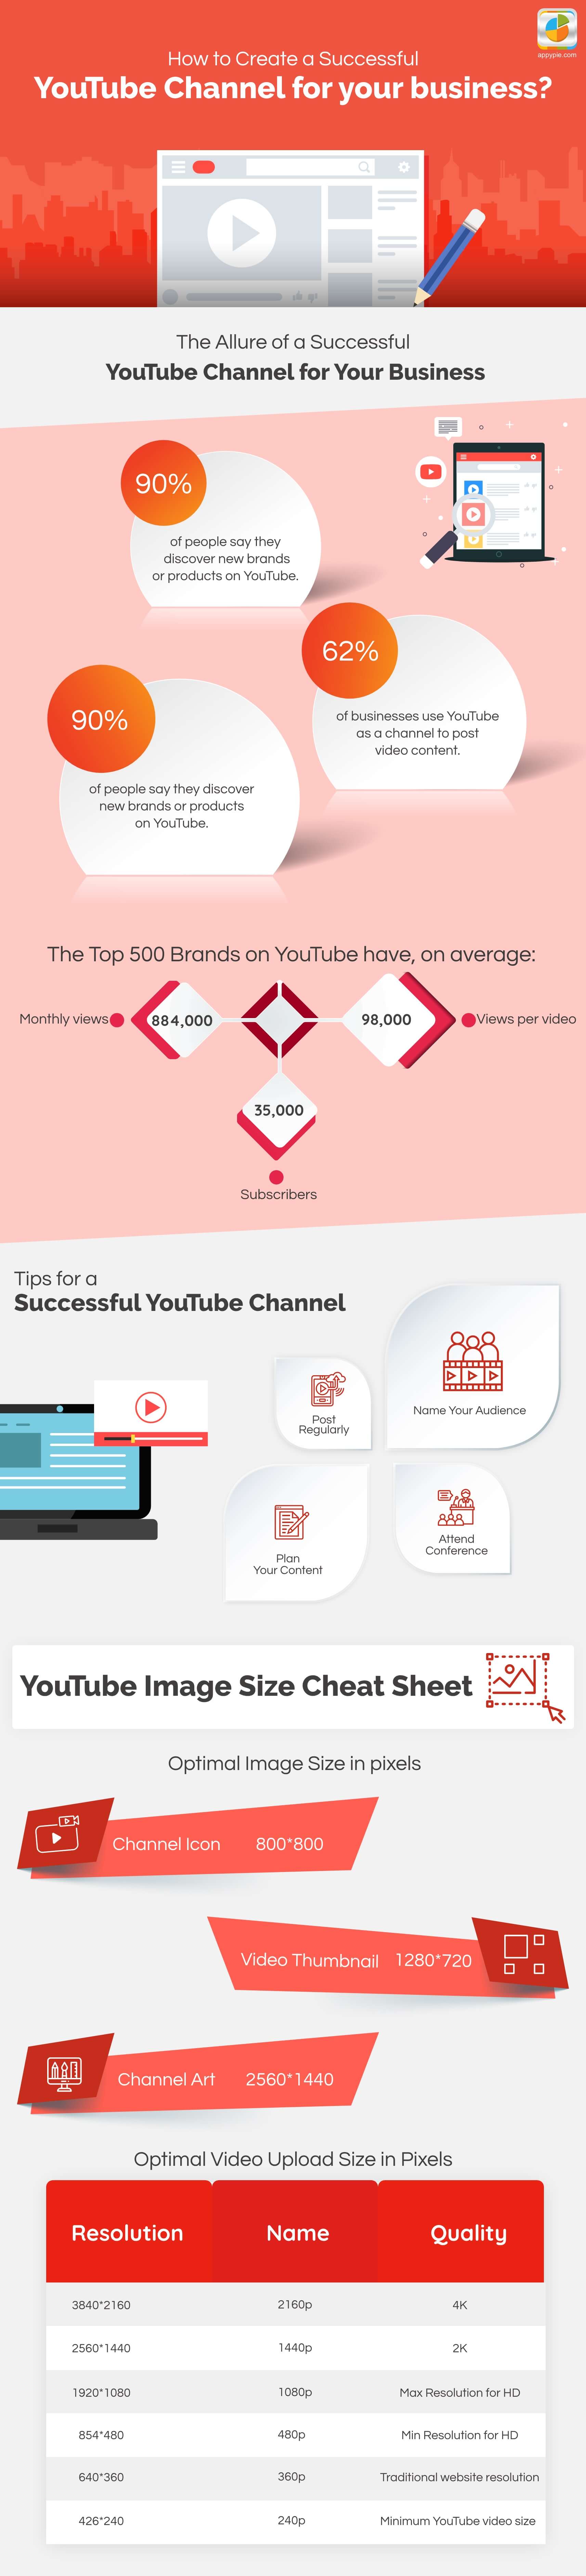  How to create a successfulYouTube channel for Your Business